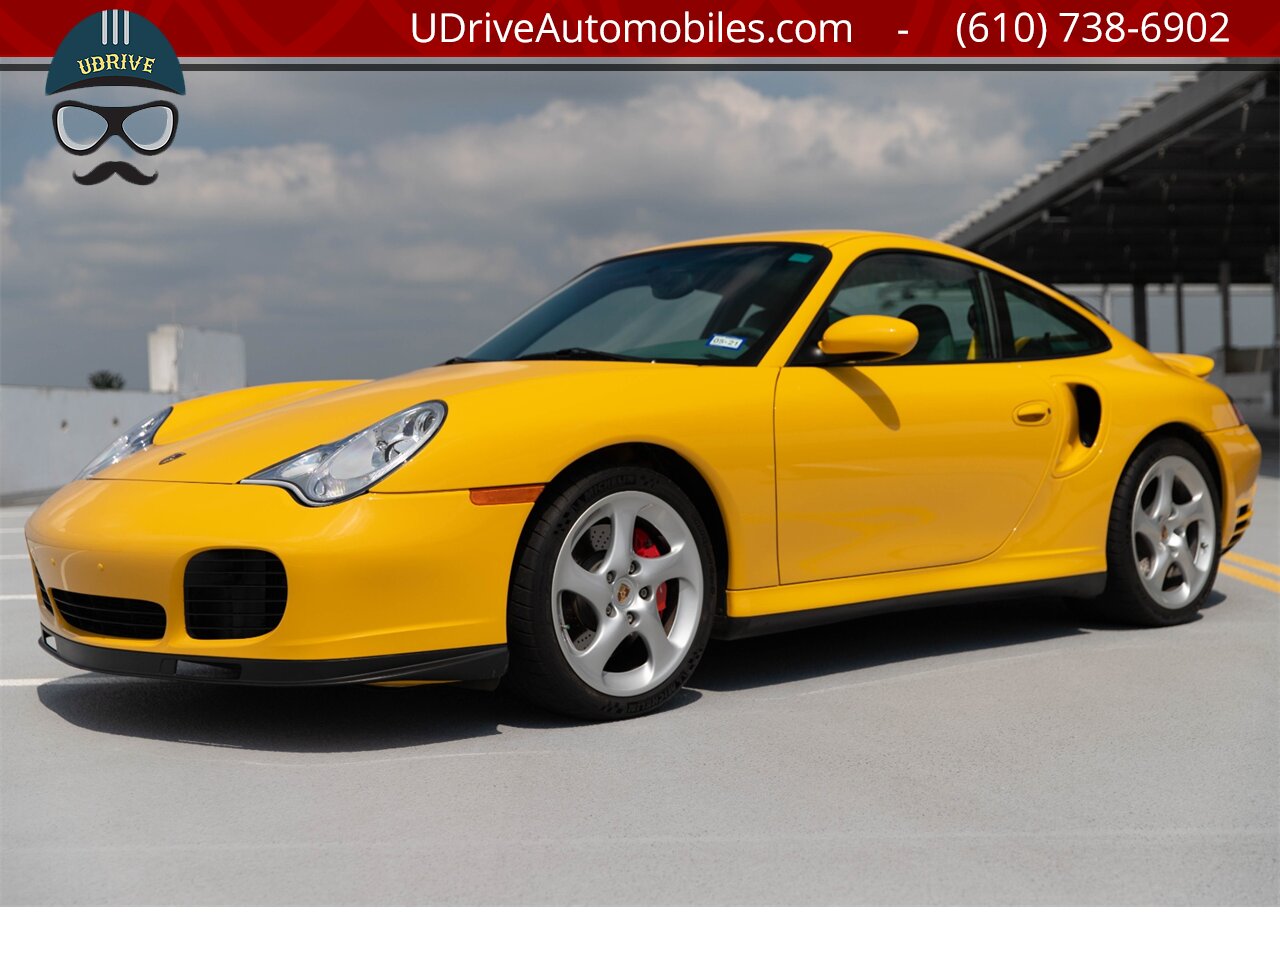 2003 Porsche 911 996 Turbo X50 6Sp Nephrite Green Lthr 9k Miles  Deviating Yellow Stitching Collector Grade BACK AGAIN - Photo 8 - West Chester, PA 19382